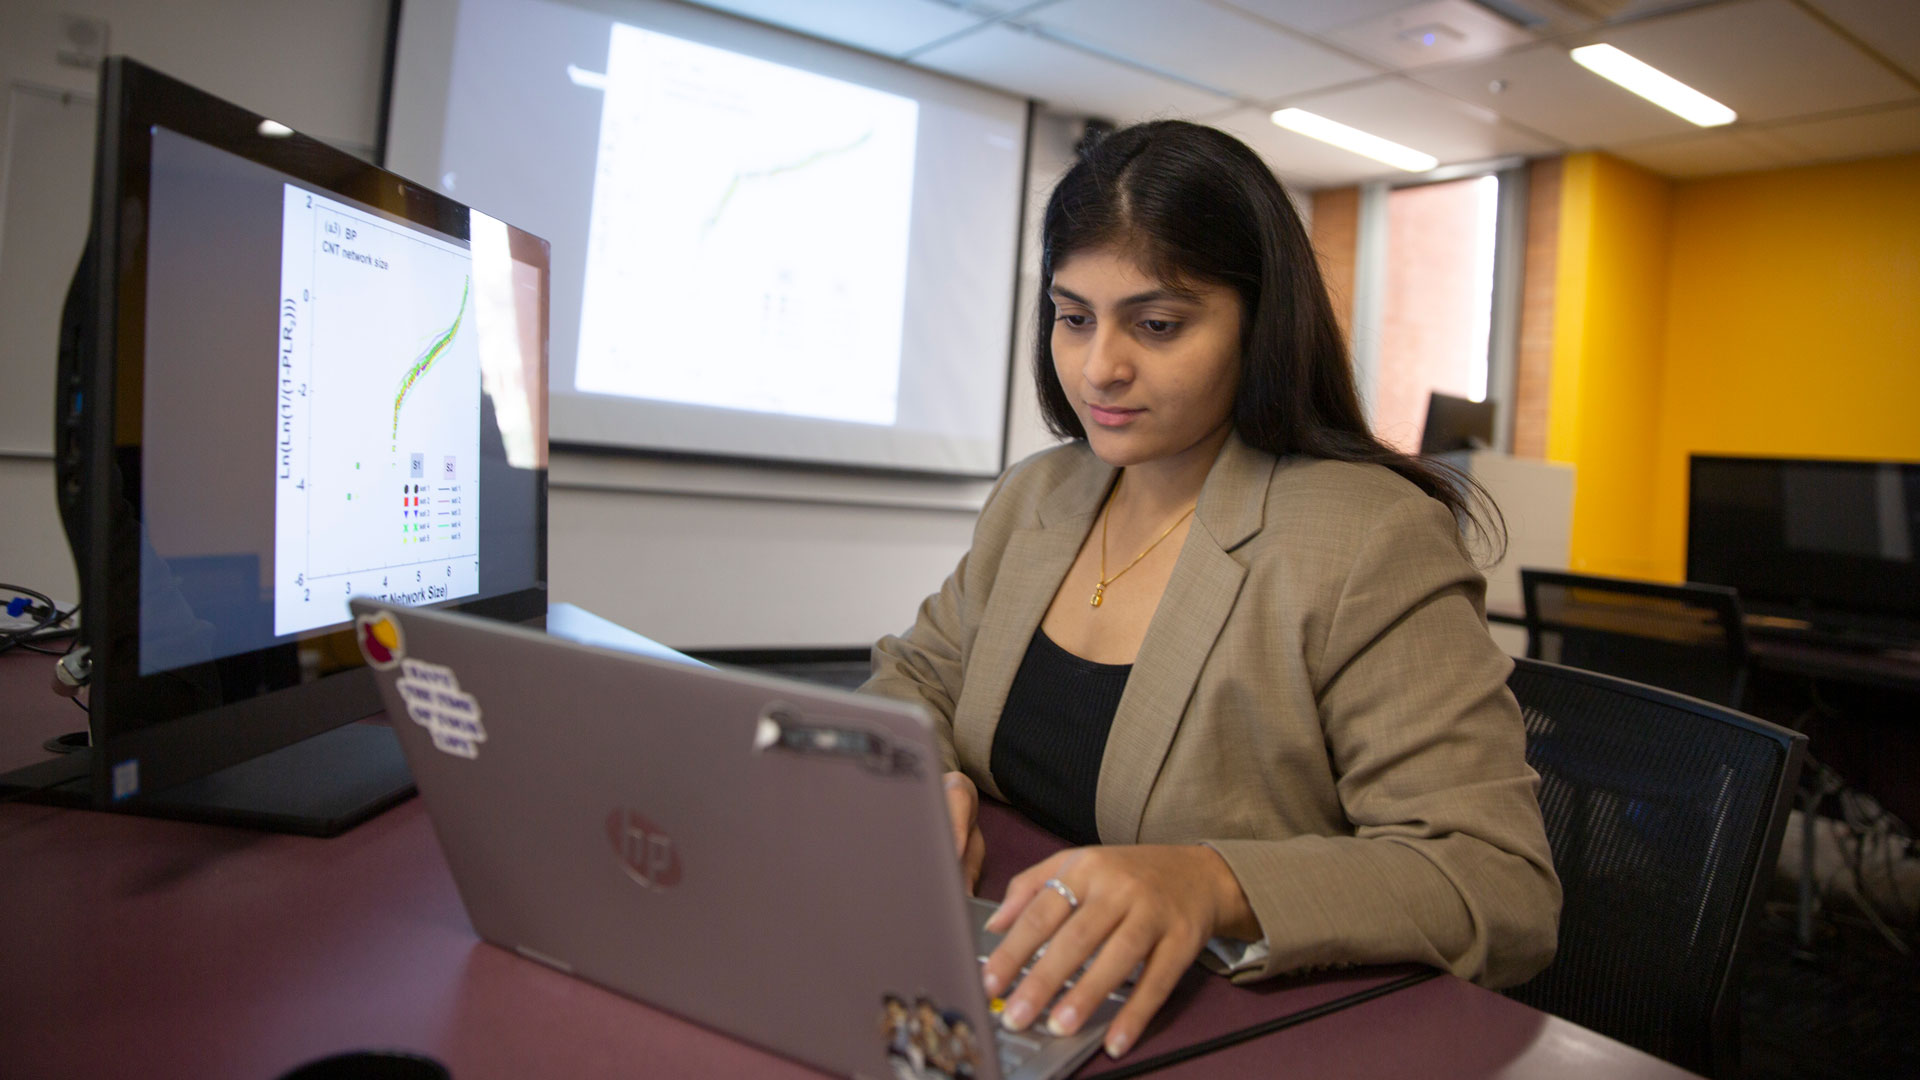 MORE student researcher Aishwarya Katkar studies how machine learning can help expedite material analysis to develop semiconductor device components.